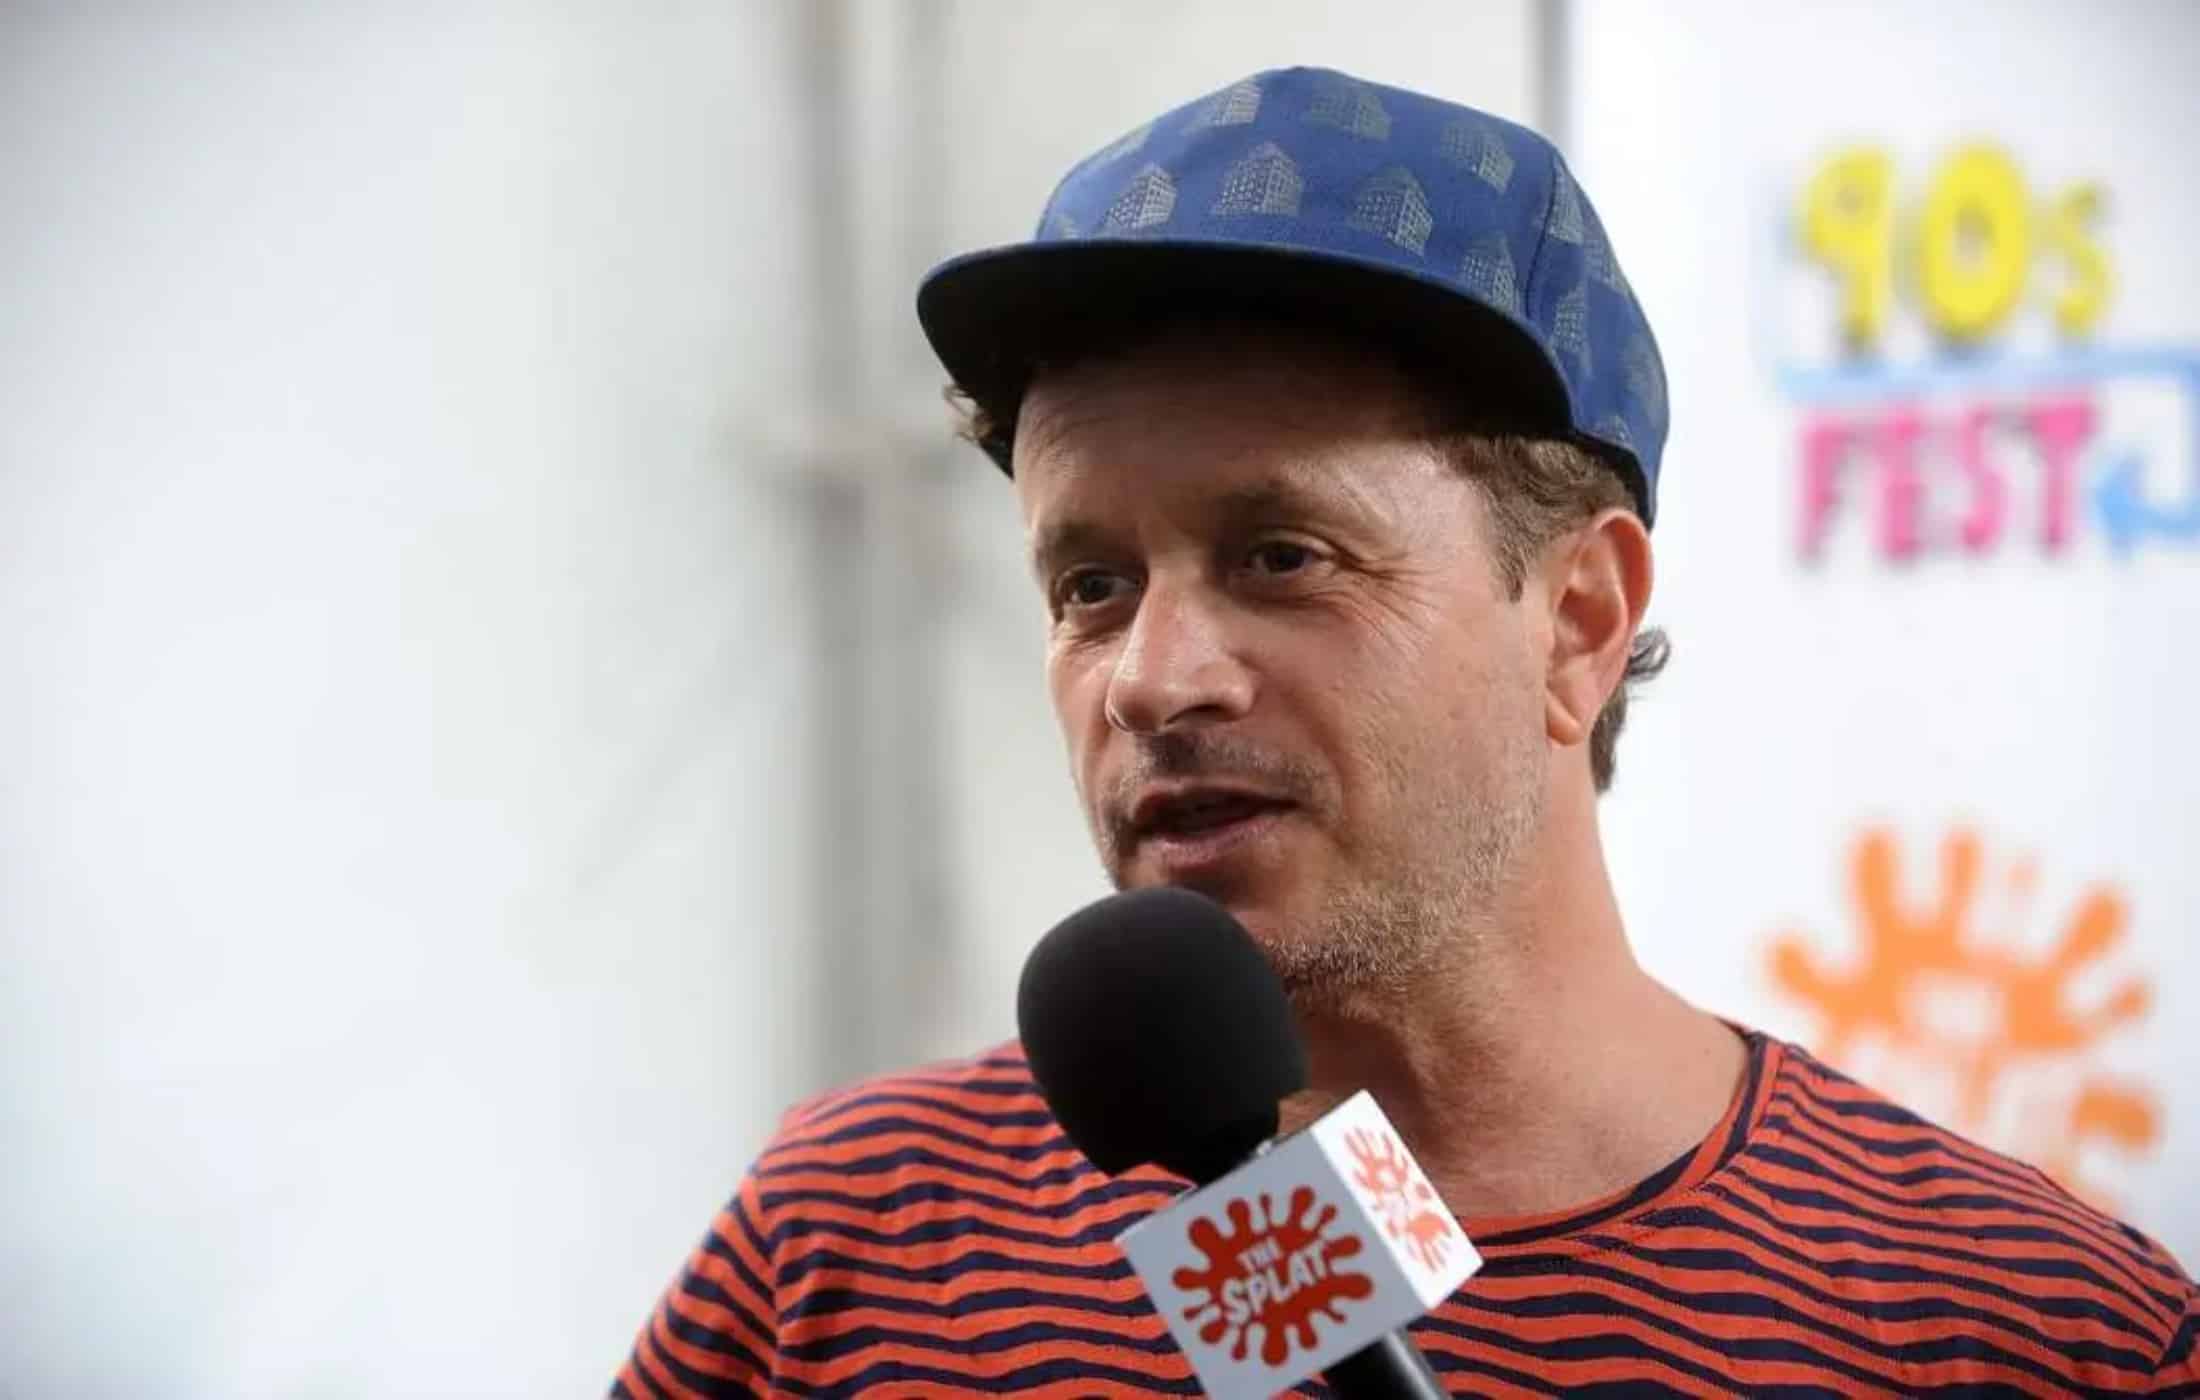 Pauly Shore net worth, age, height, wiki, family, biography and latest